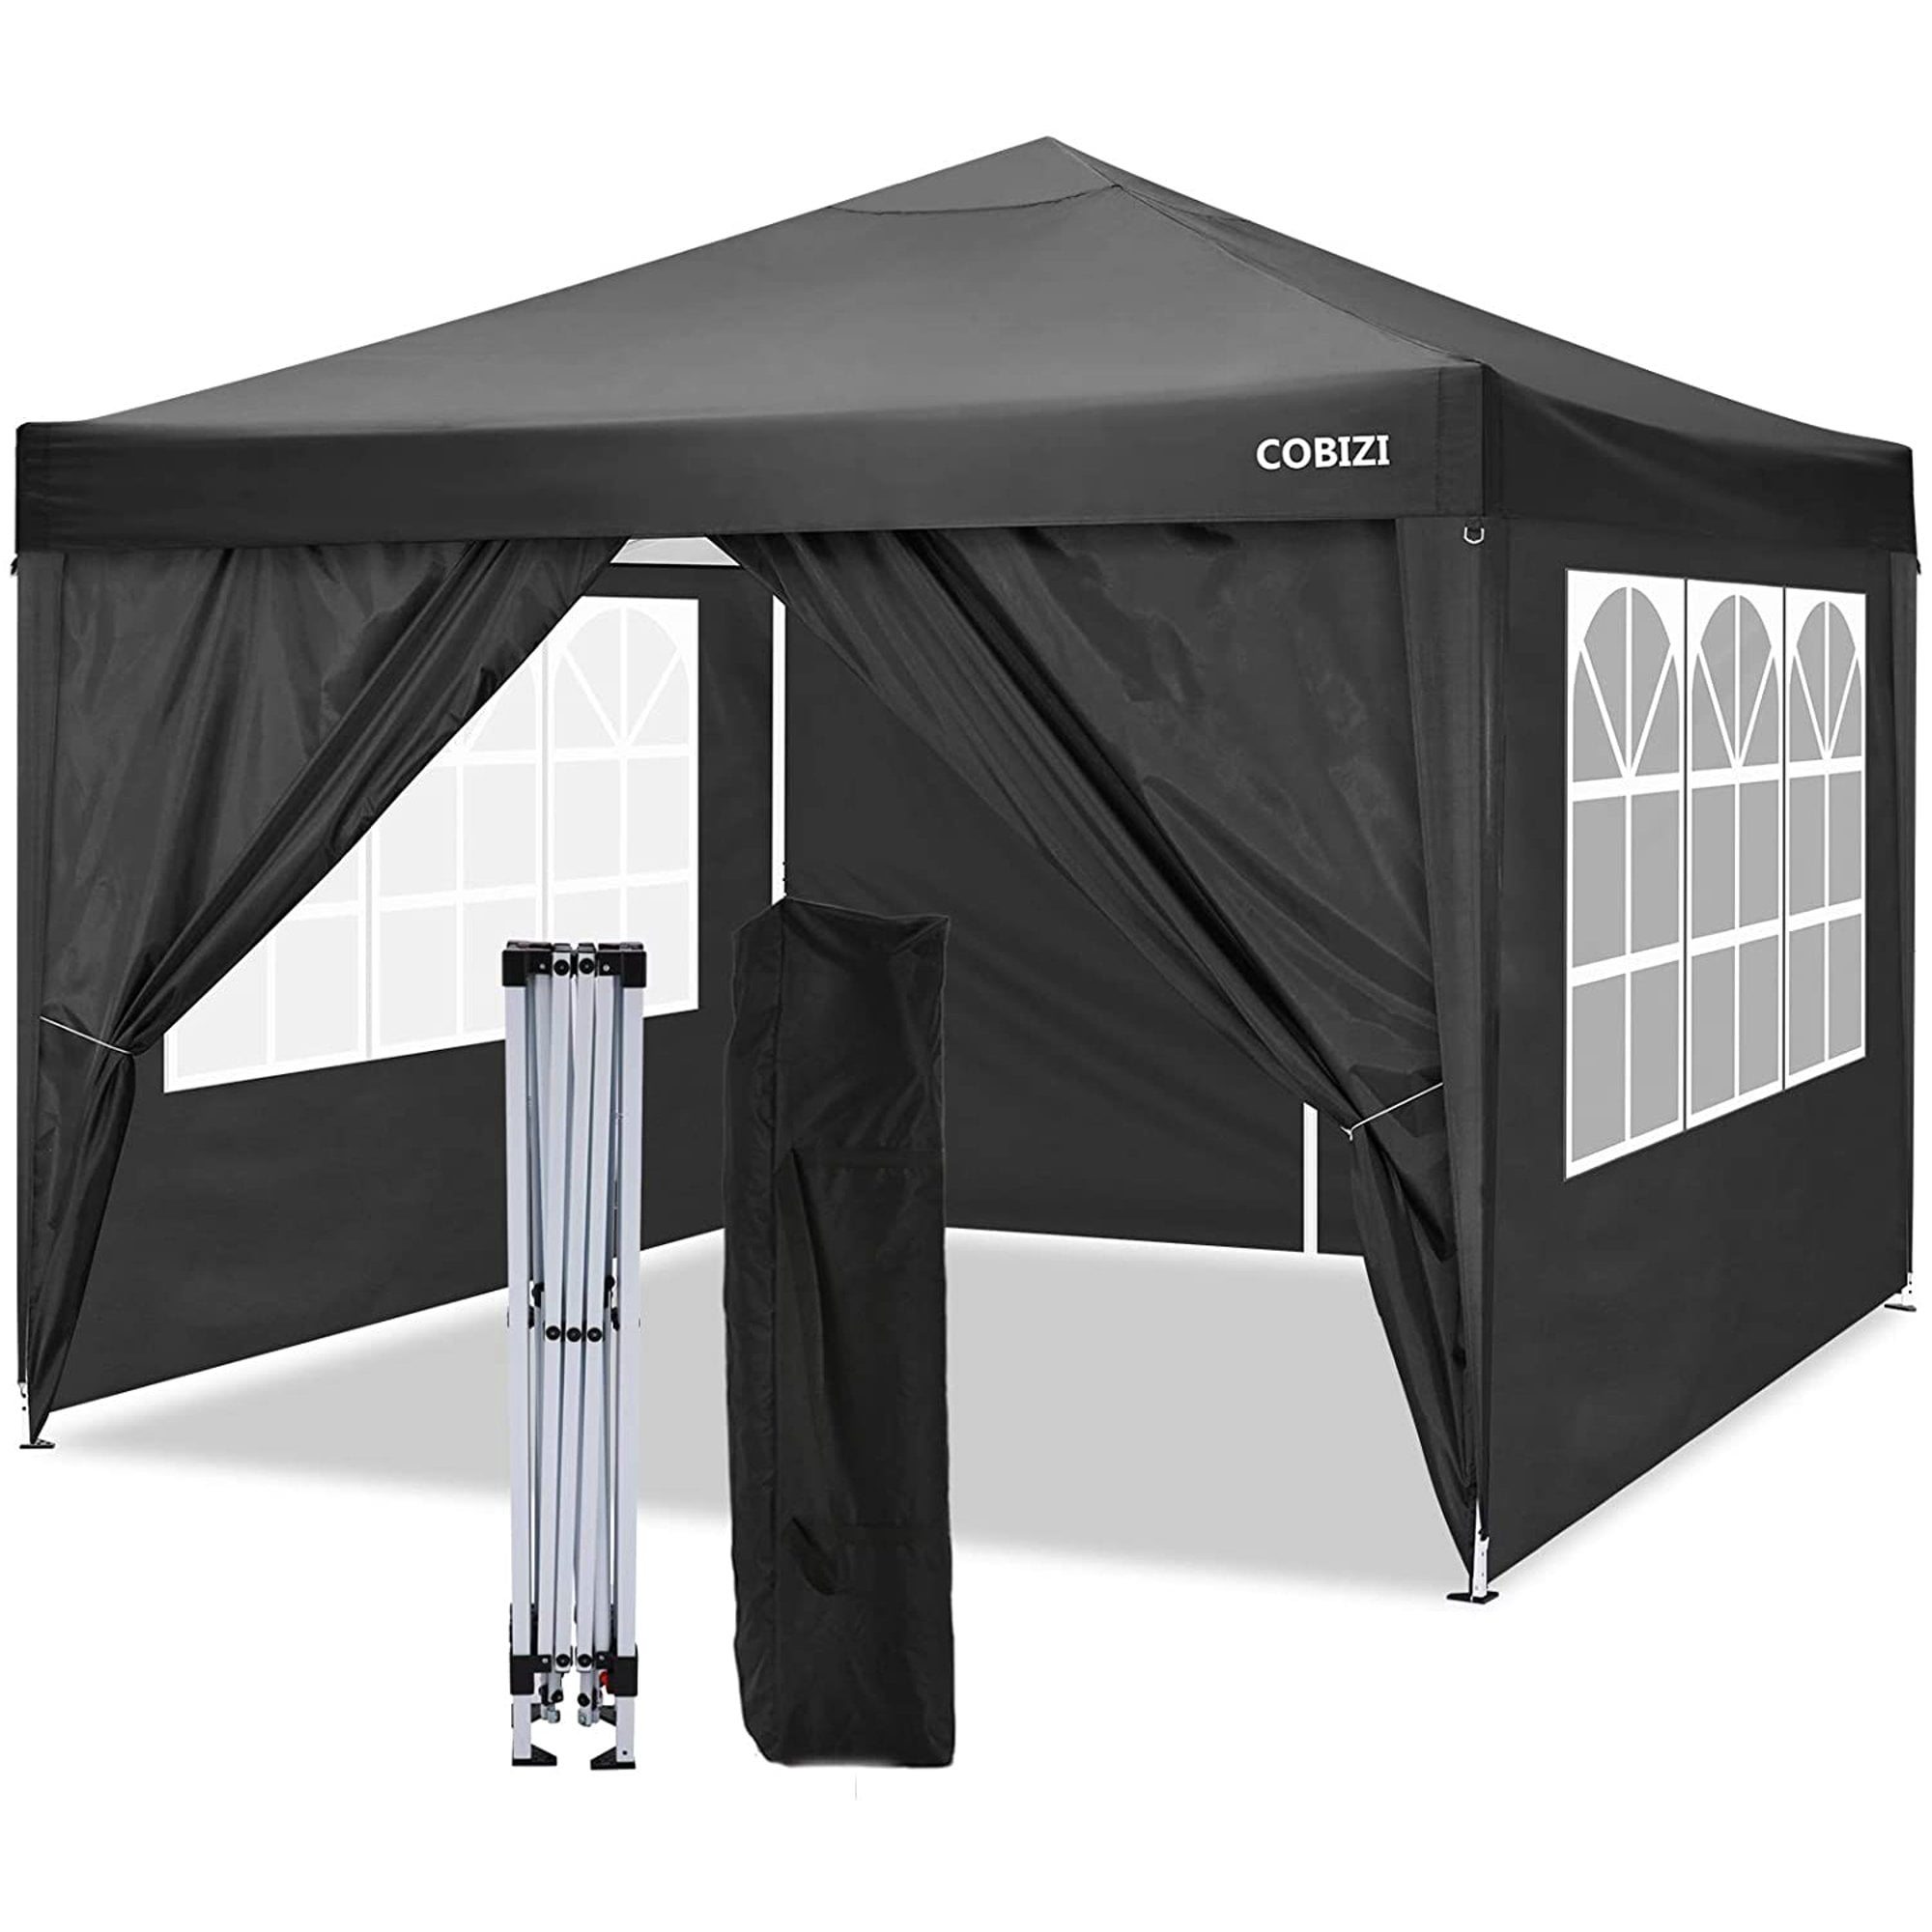 10x10 Pop-up Canopy Tent Commercial Instant Shelter with 4 Sidewalls,Carry Bag 